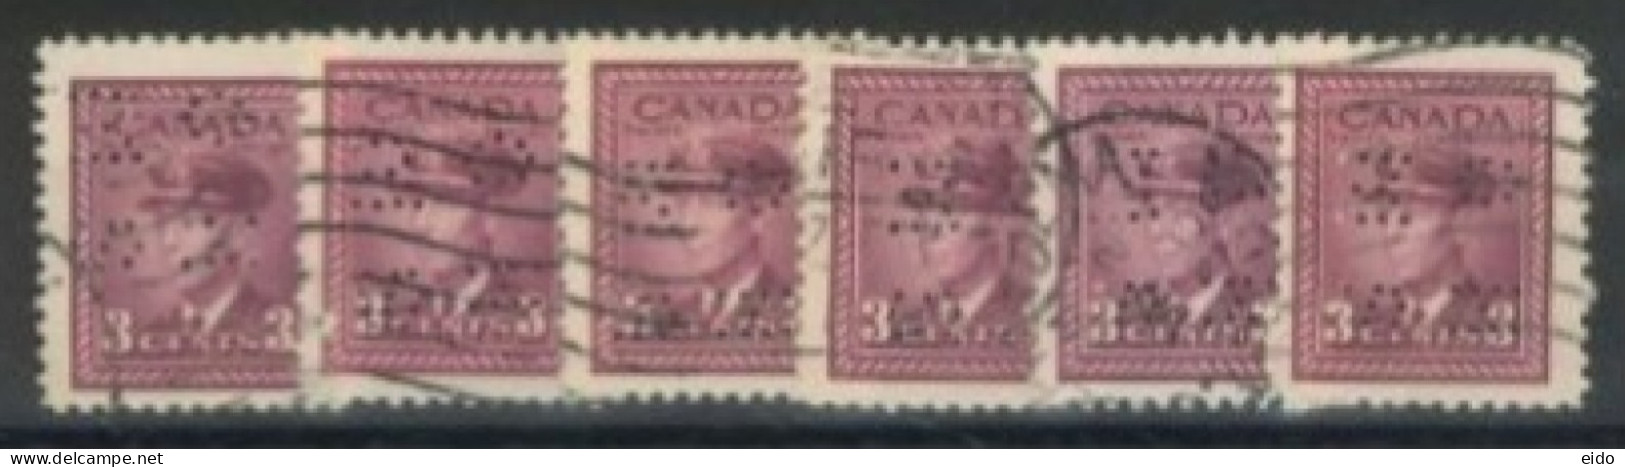 CANADA - 1942, KING GEORGE VI IN NAVAL UNIFORM STAMPS QTY. OF 6, WITH REDUCED SPECIAL PRICE, USED. - Gebruikt